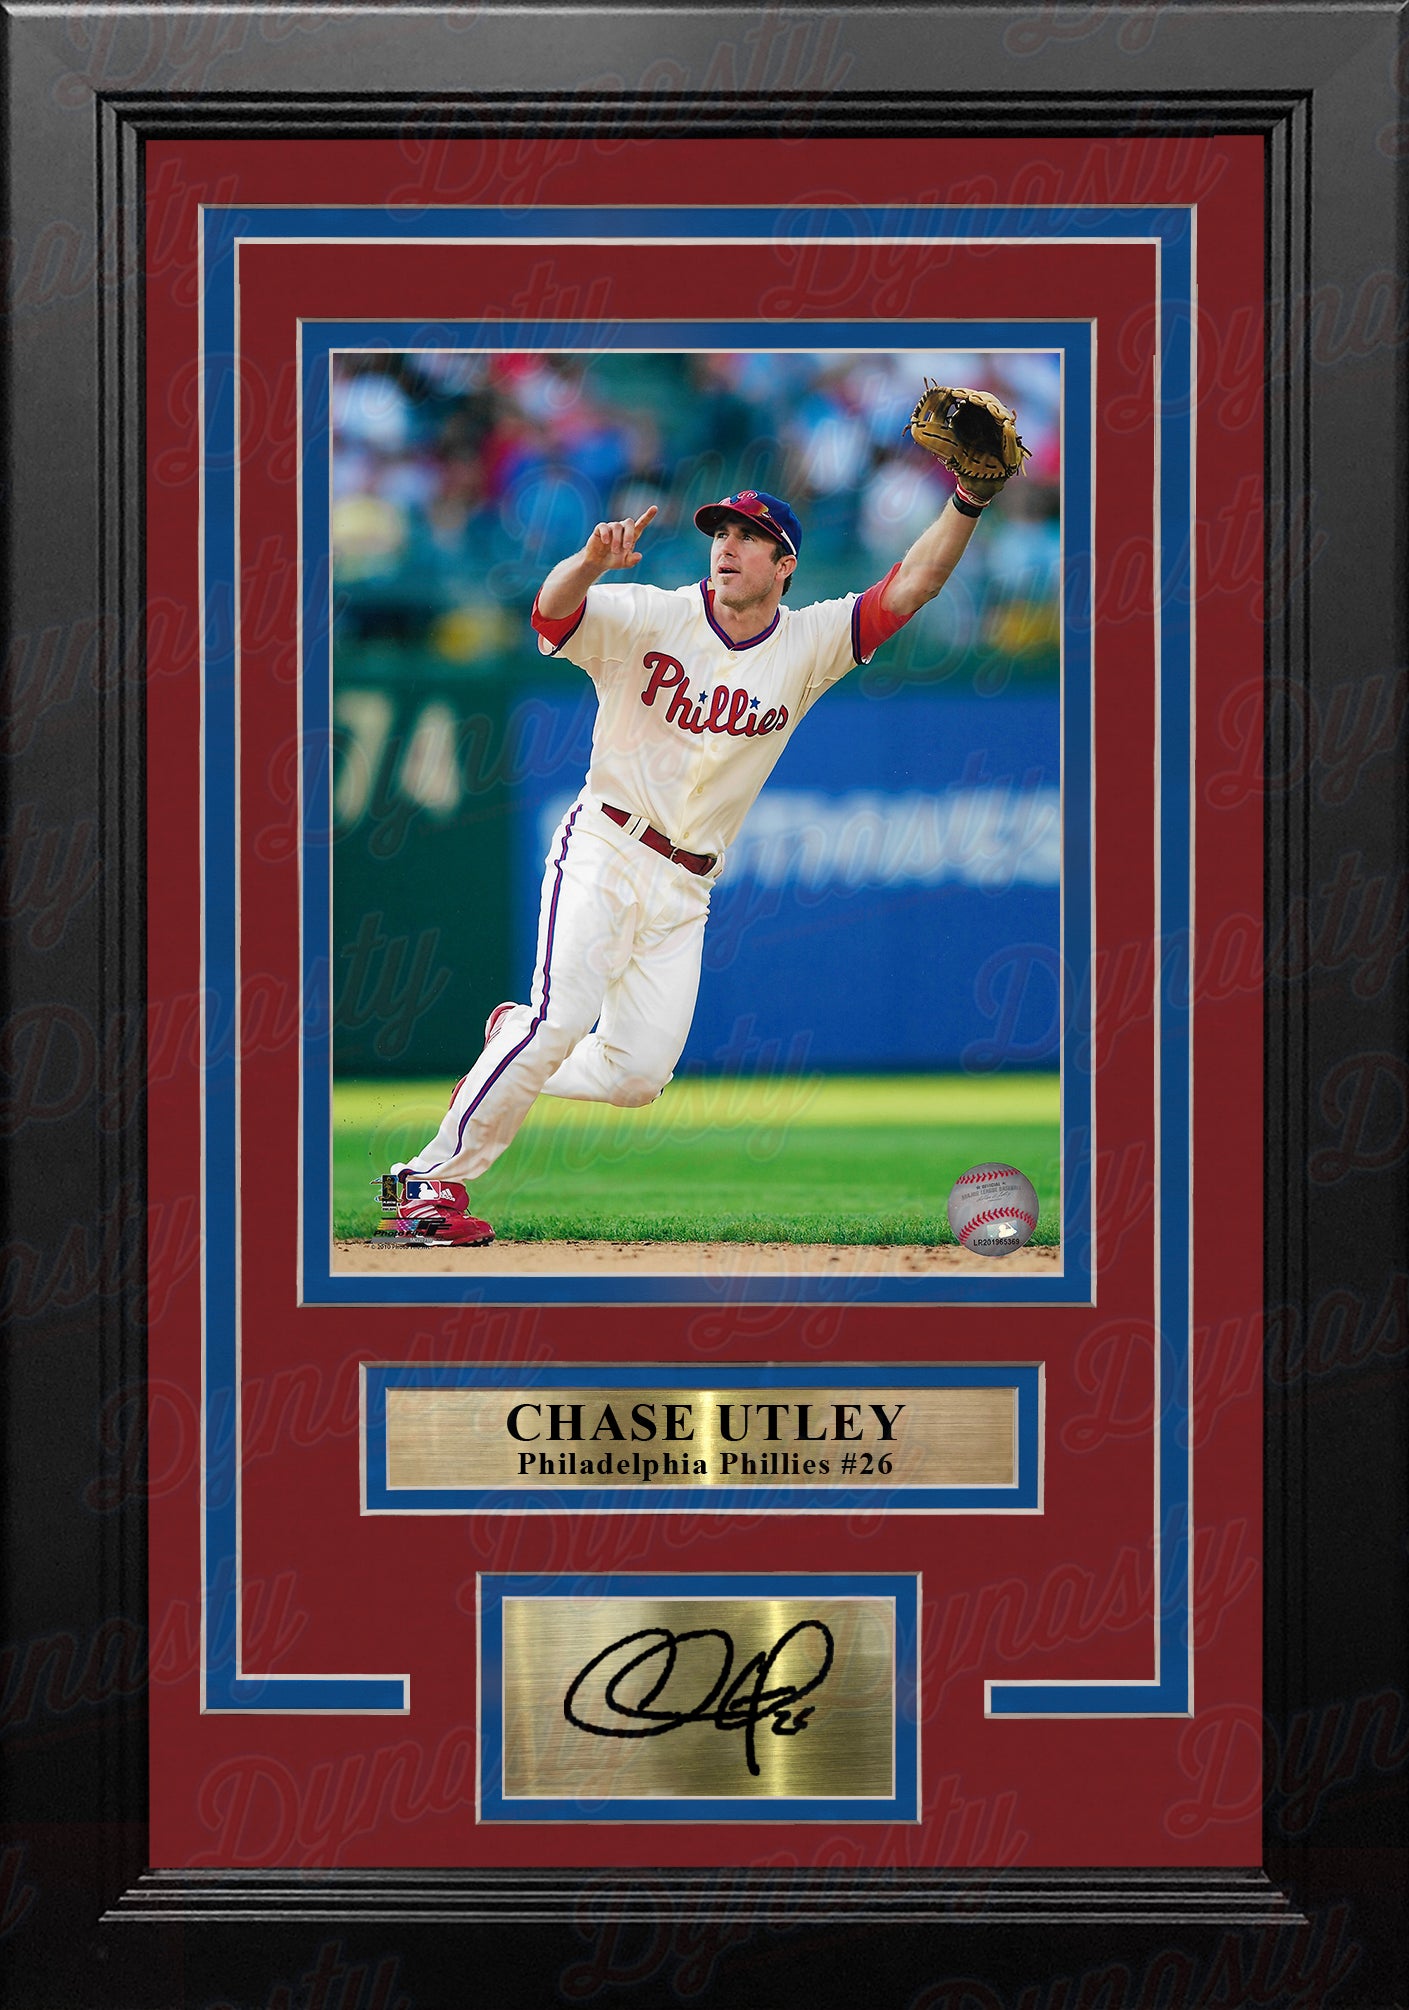 Chase Utley on the Field Philadelphia Phillies 8x10 Framed Photo with Engraved Autograph - Dynasty Sports & Framing 